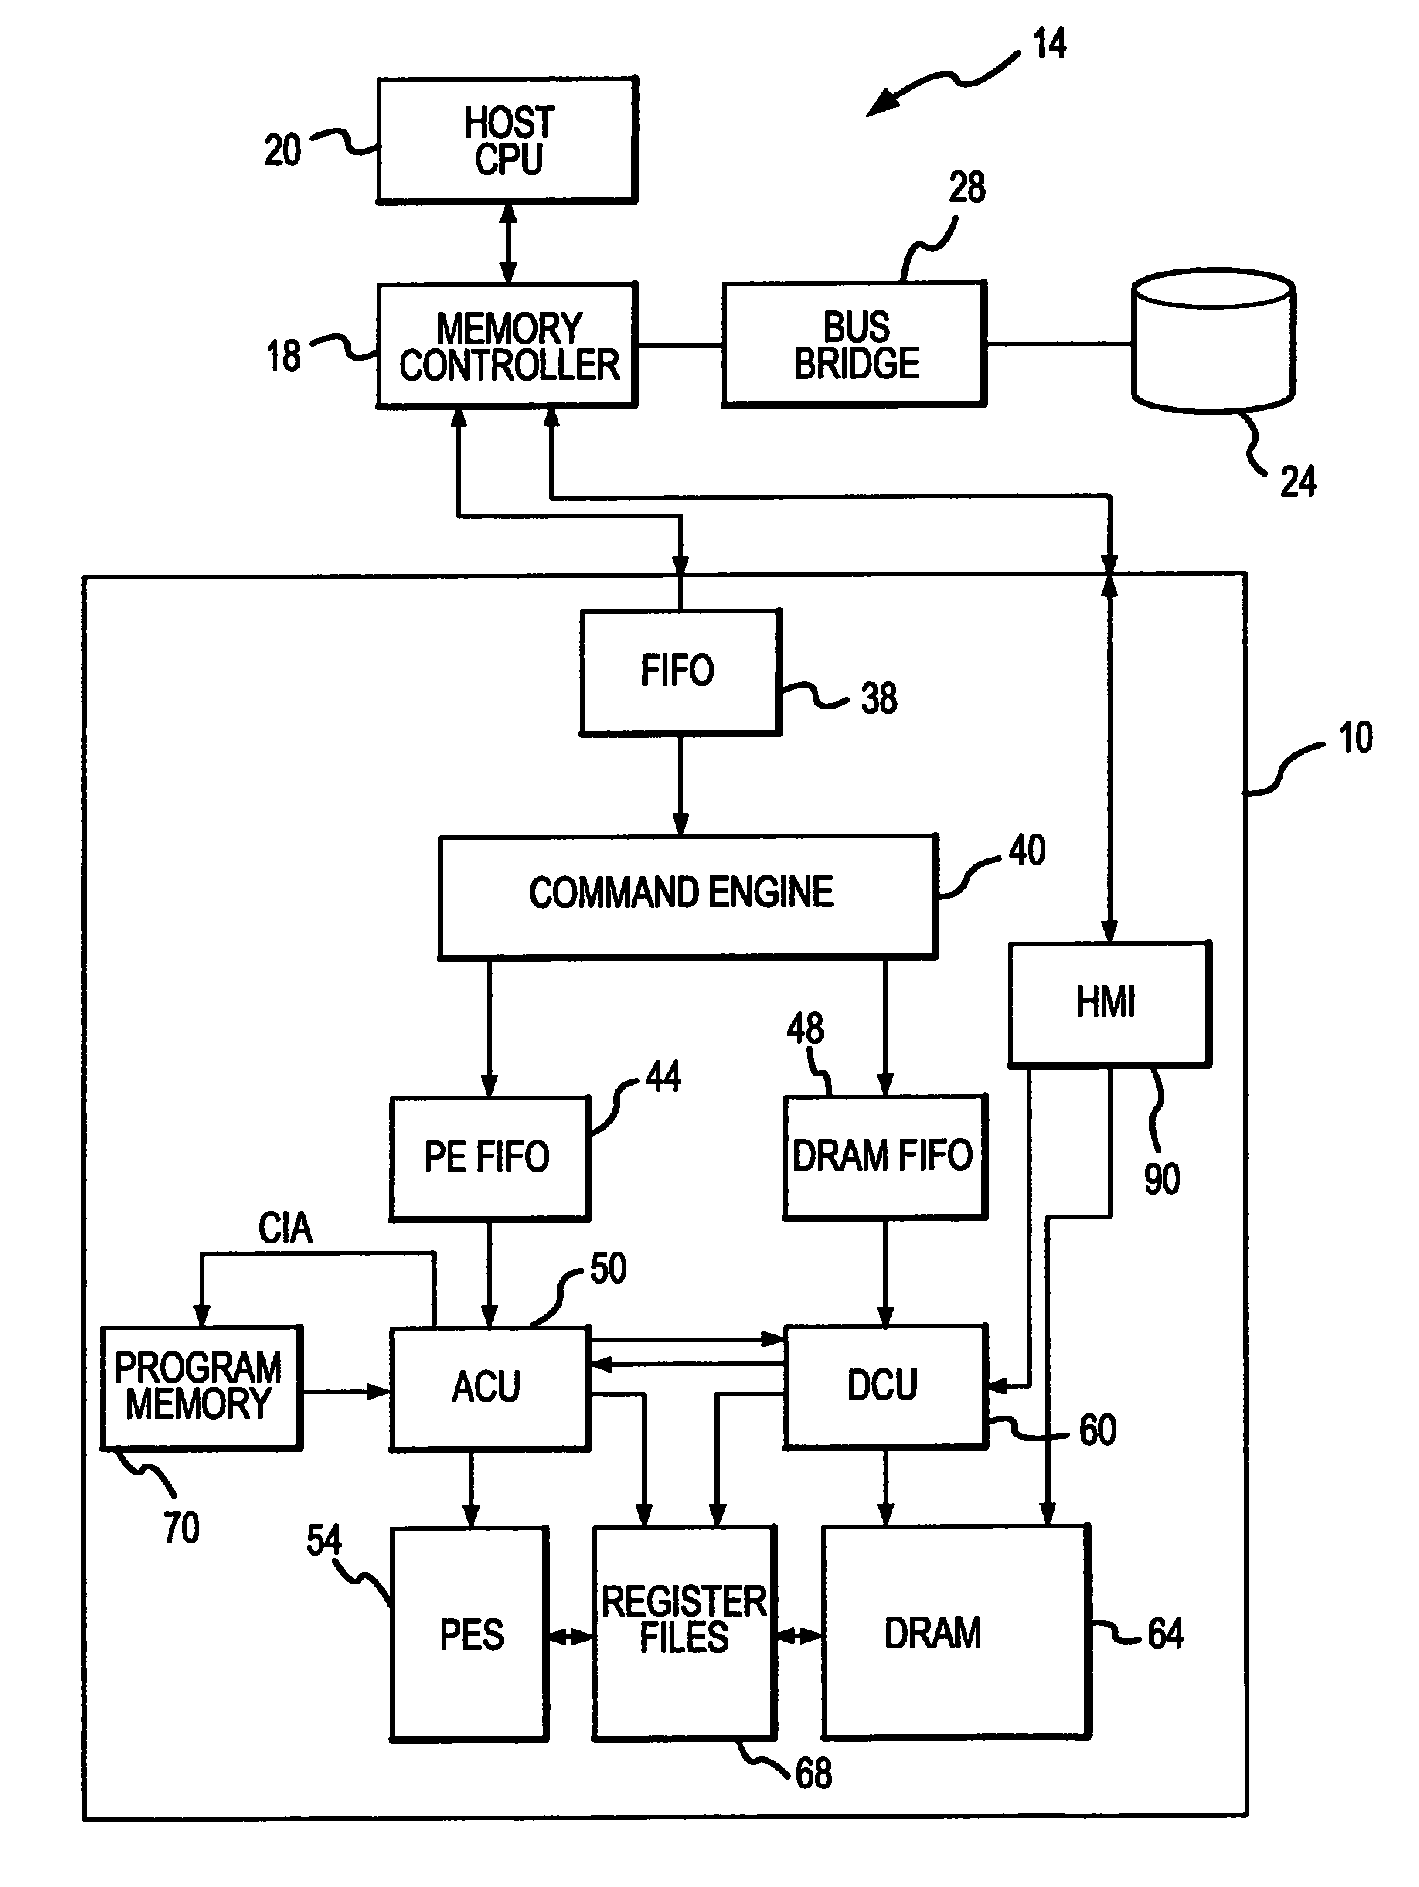 Active memory data compression system and method